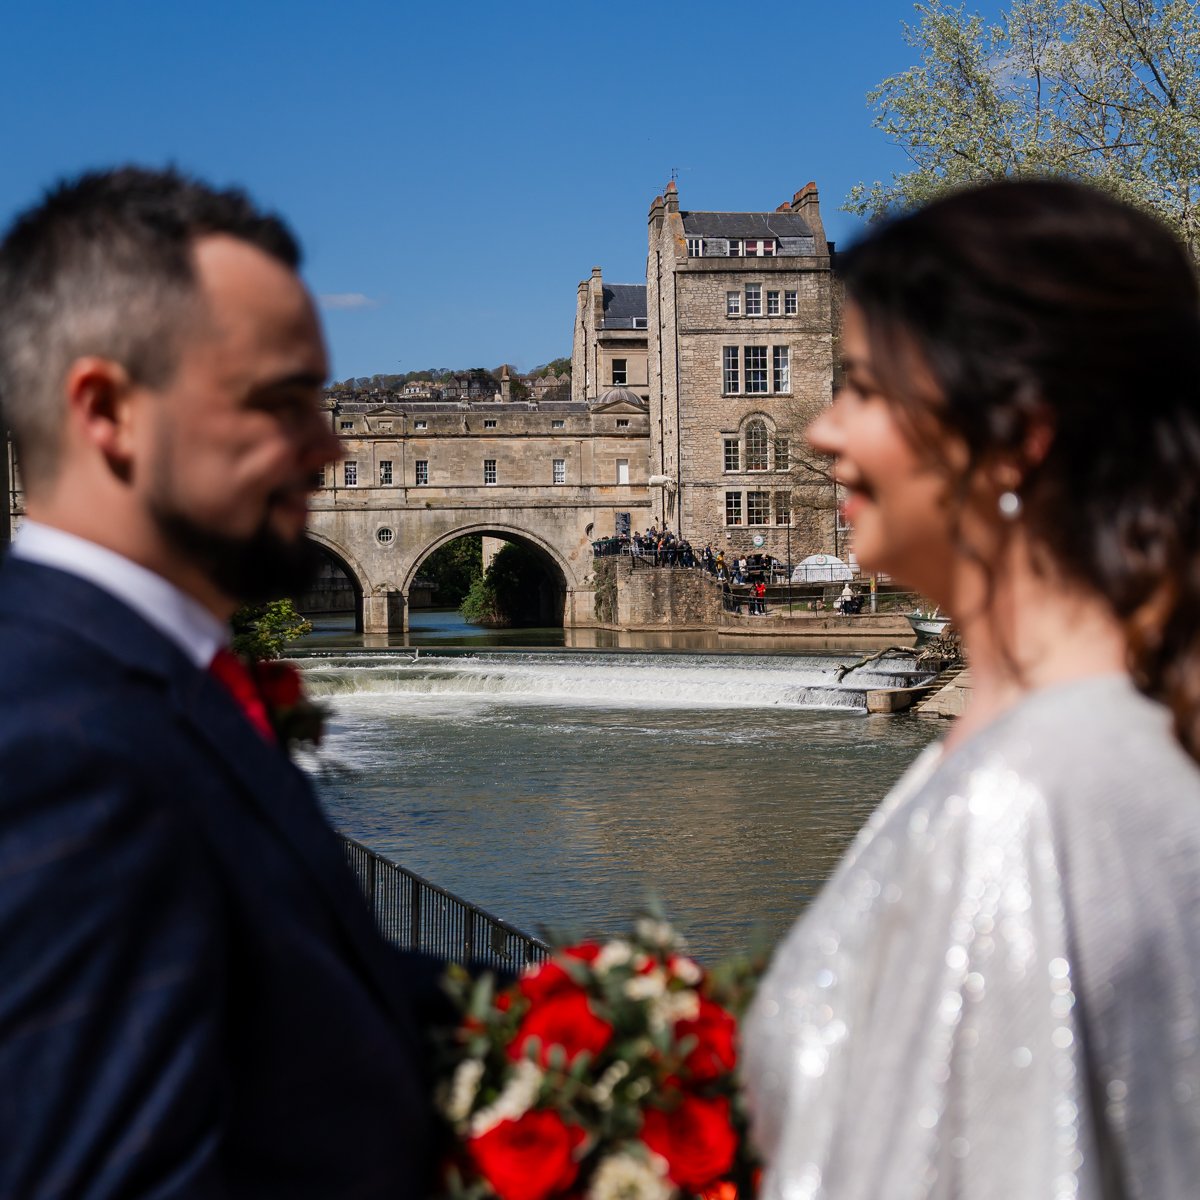 Long may the blue skies continue!

Throwing it back to last month when I had the pleasure of capturing a beautiful micro-wedding at Bath Guildhall. 

The sun shone and we were treated to beautiful blue skies all day. Fingers crossed the weather conti